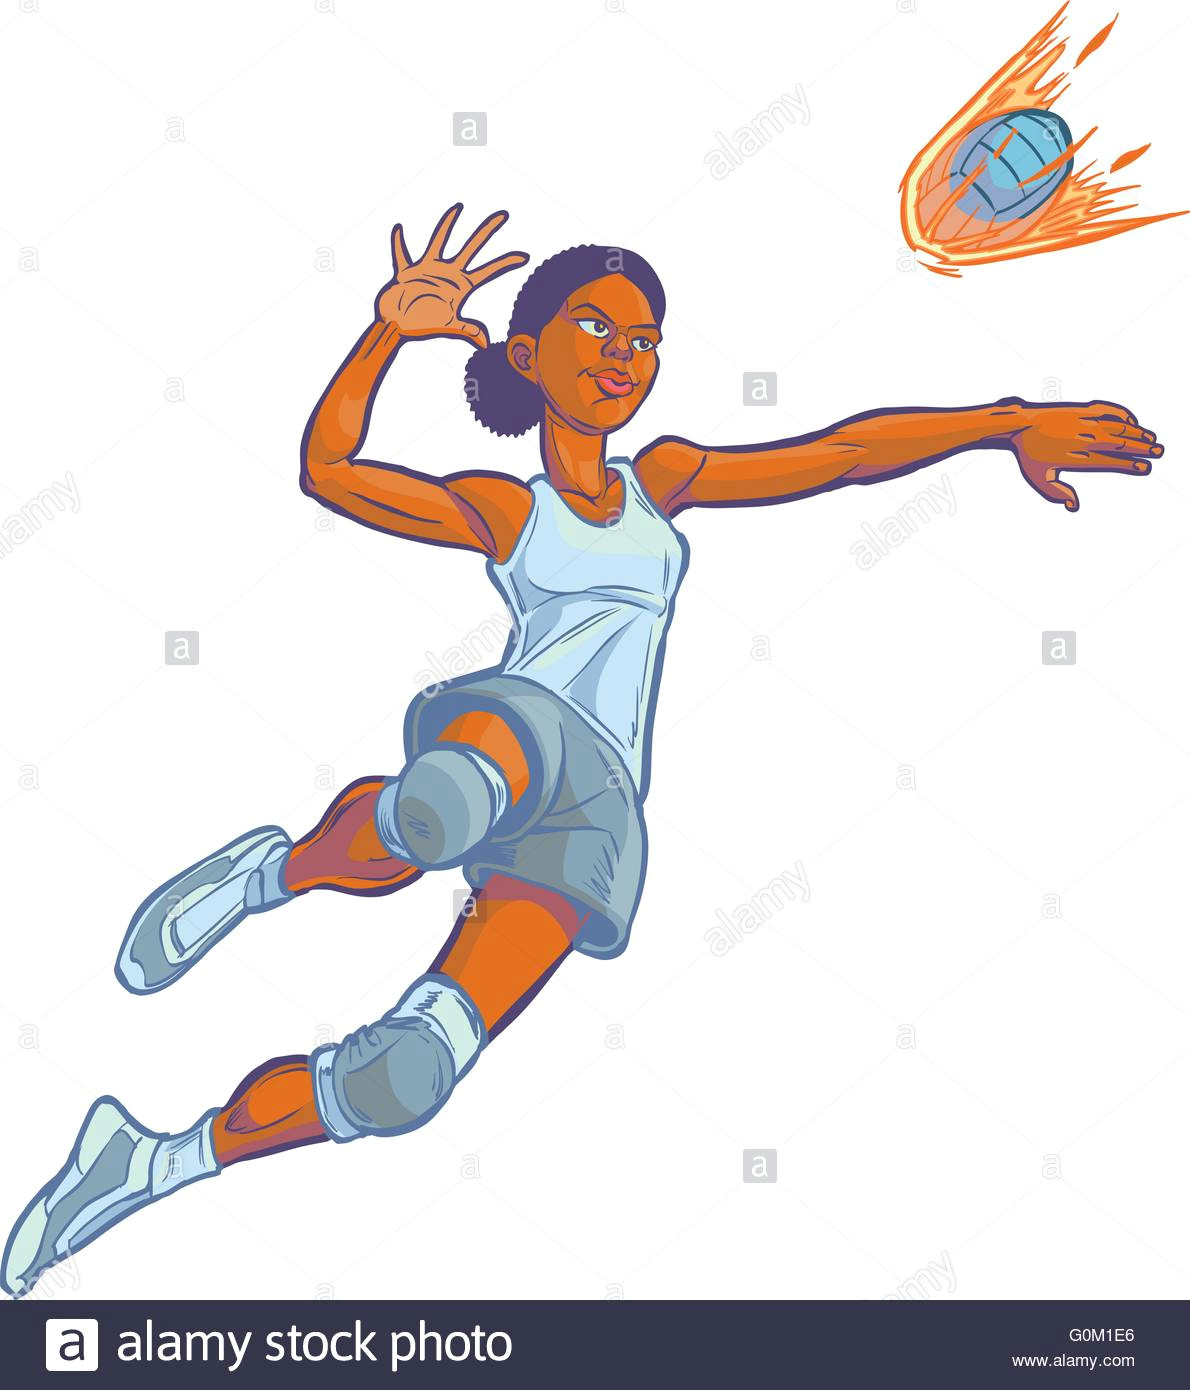 Drawing Of Girl Playing Volleyball Volleyball Cartoon Stock Photos Volleyball Cartoon Stock Images